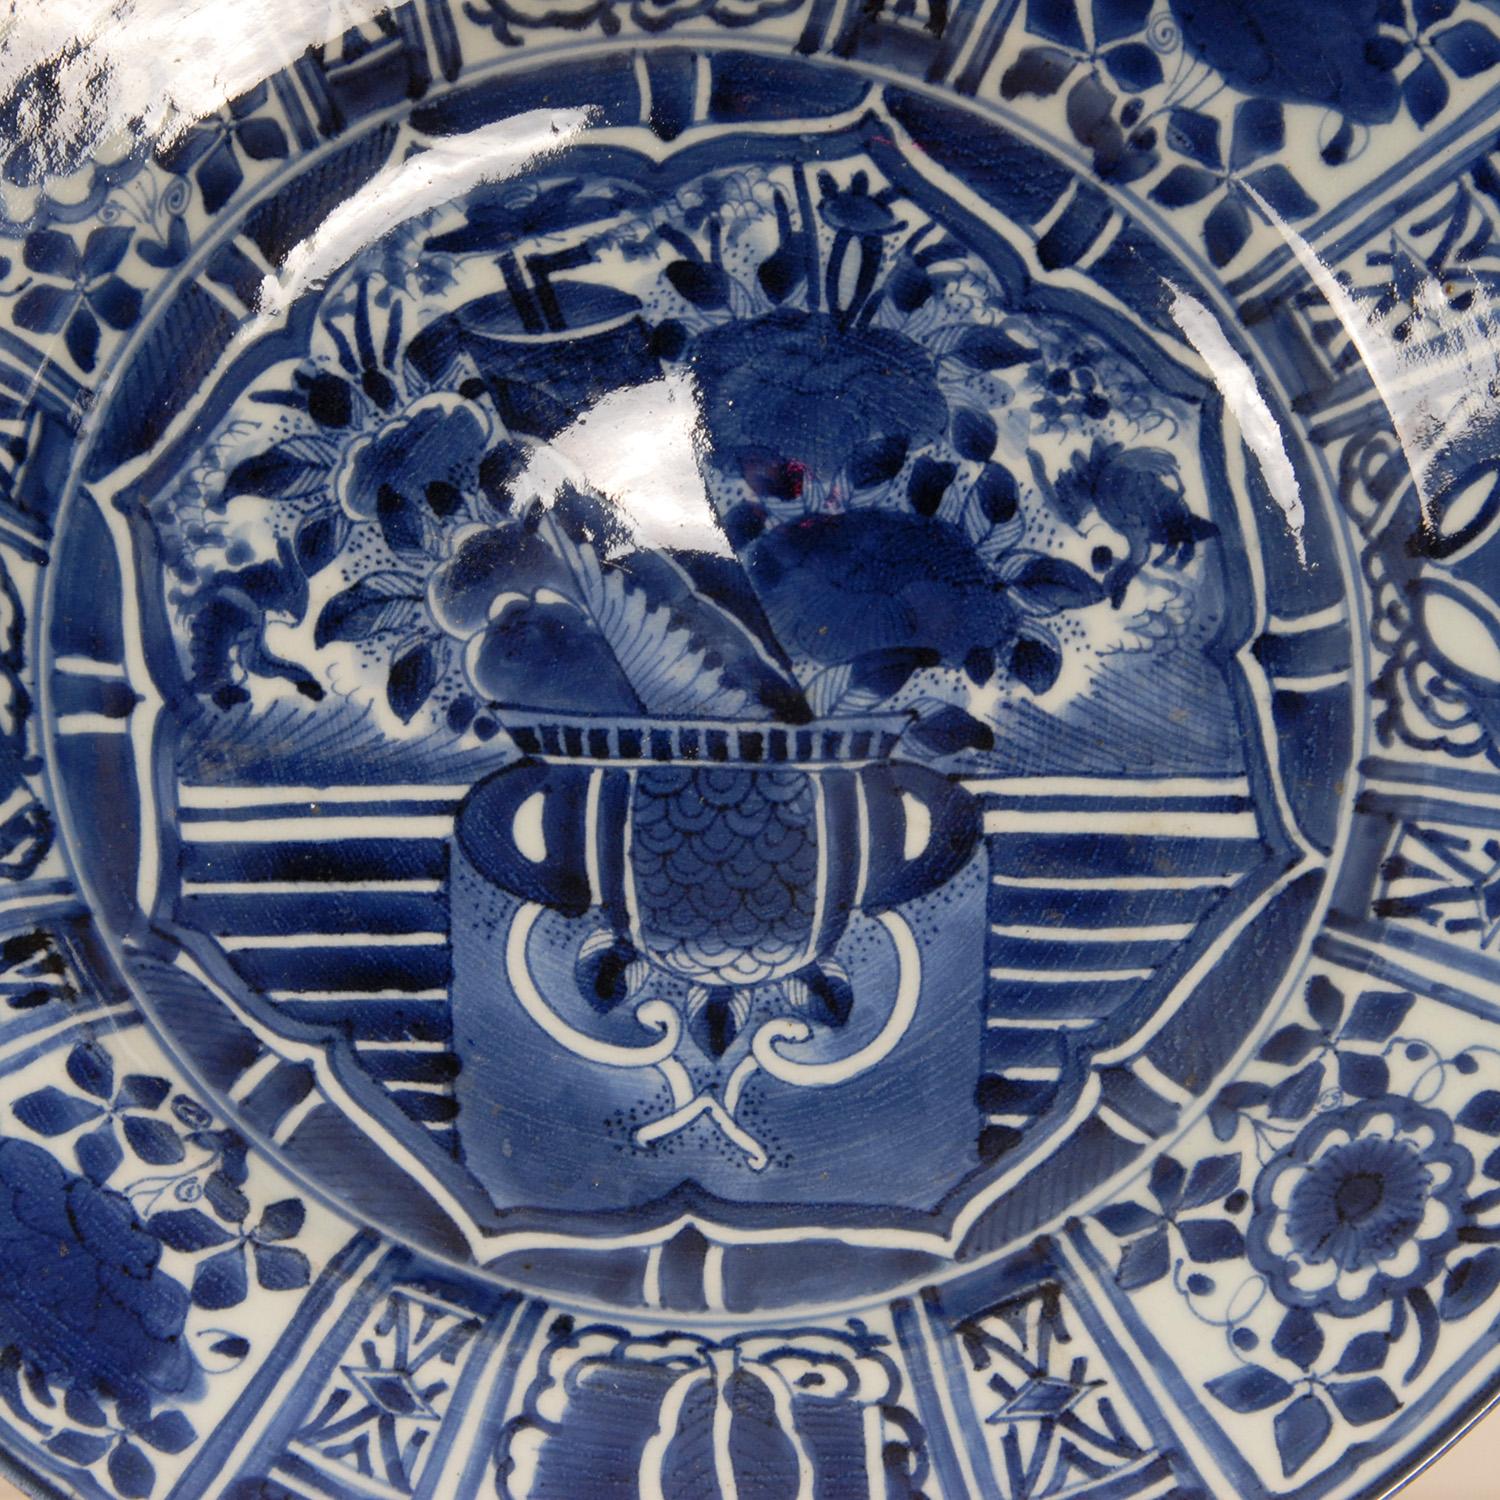 Japanese 17th Century Arita Dish Blue White Export Porcelain Charger Ming Edo Period For Sale